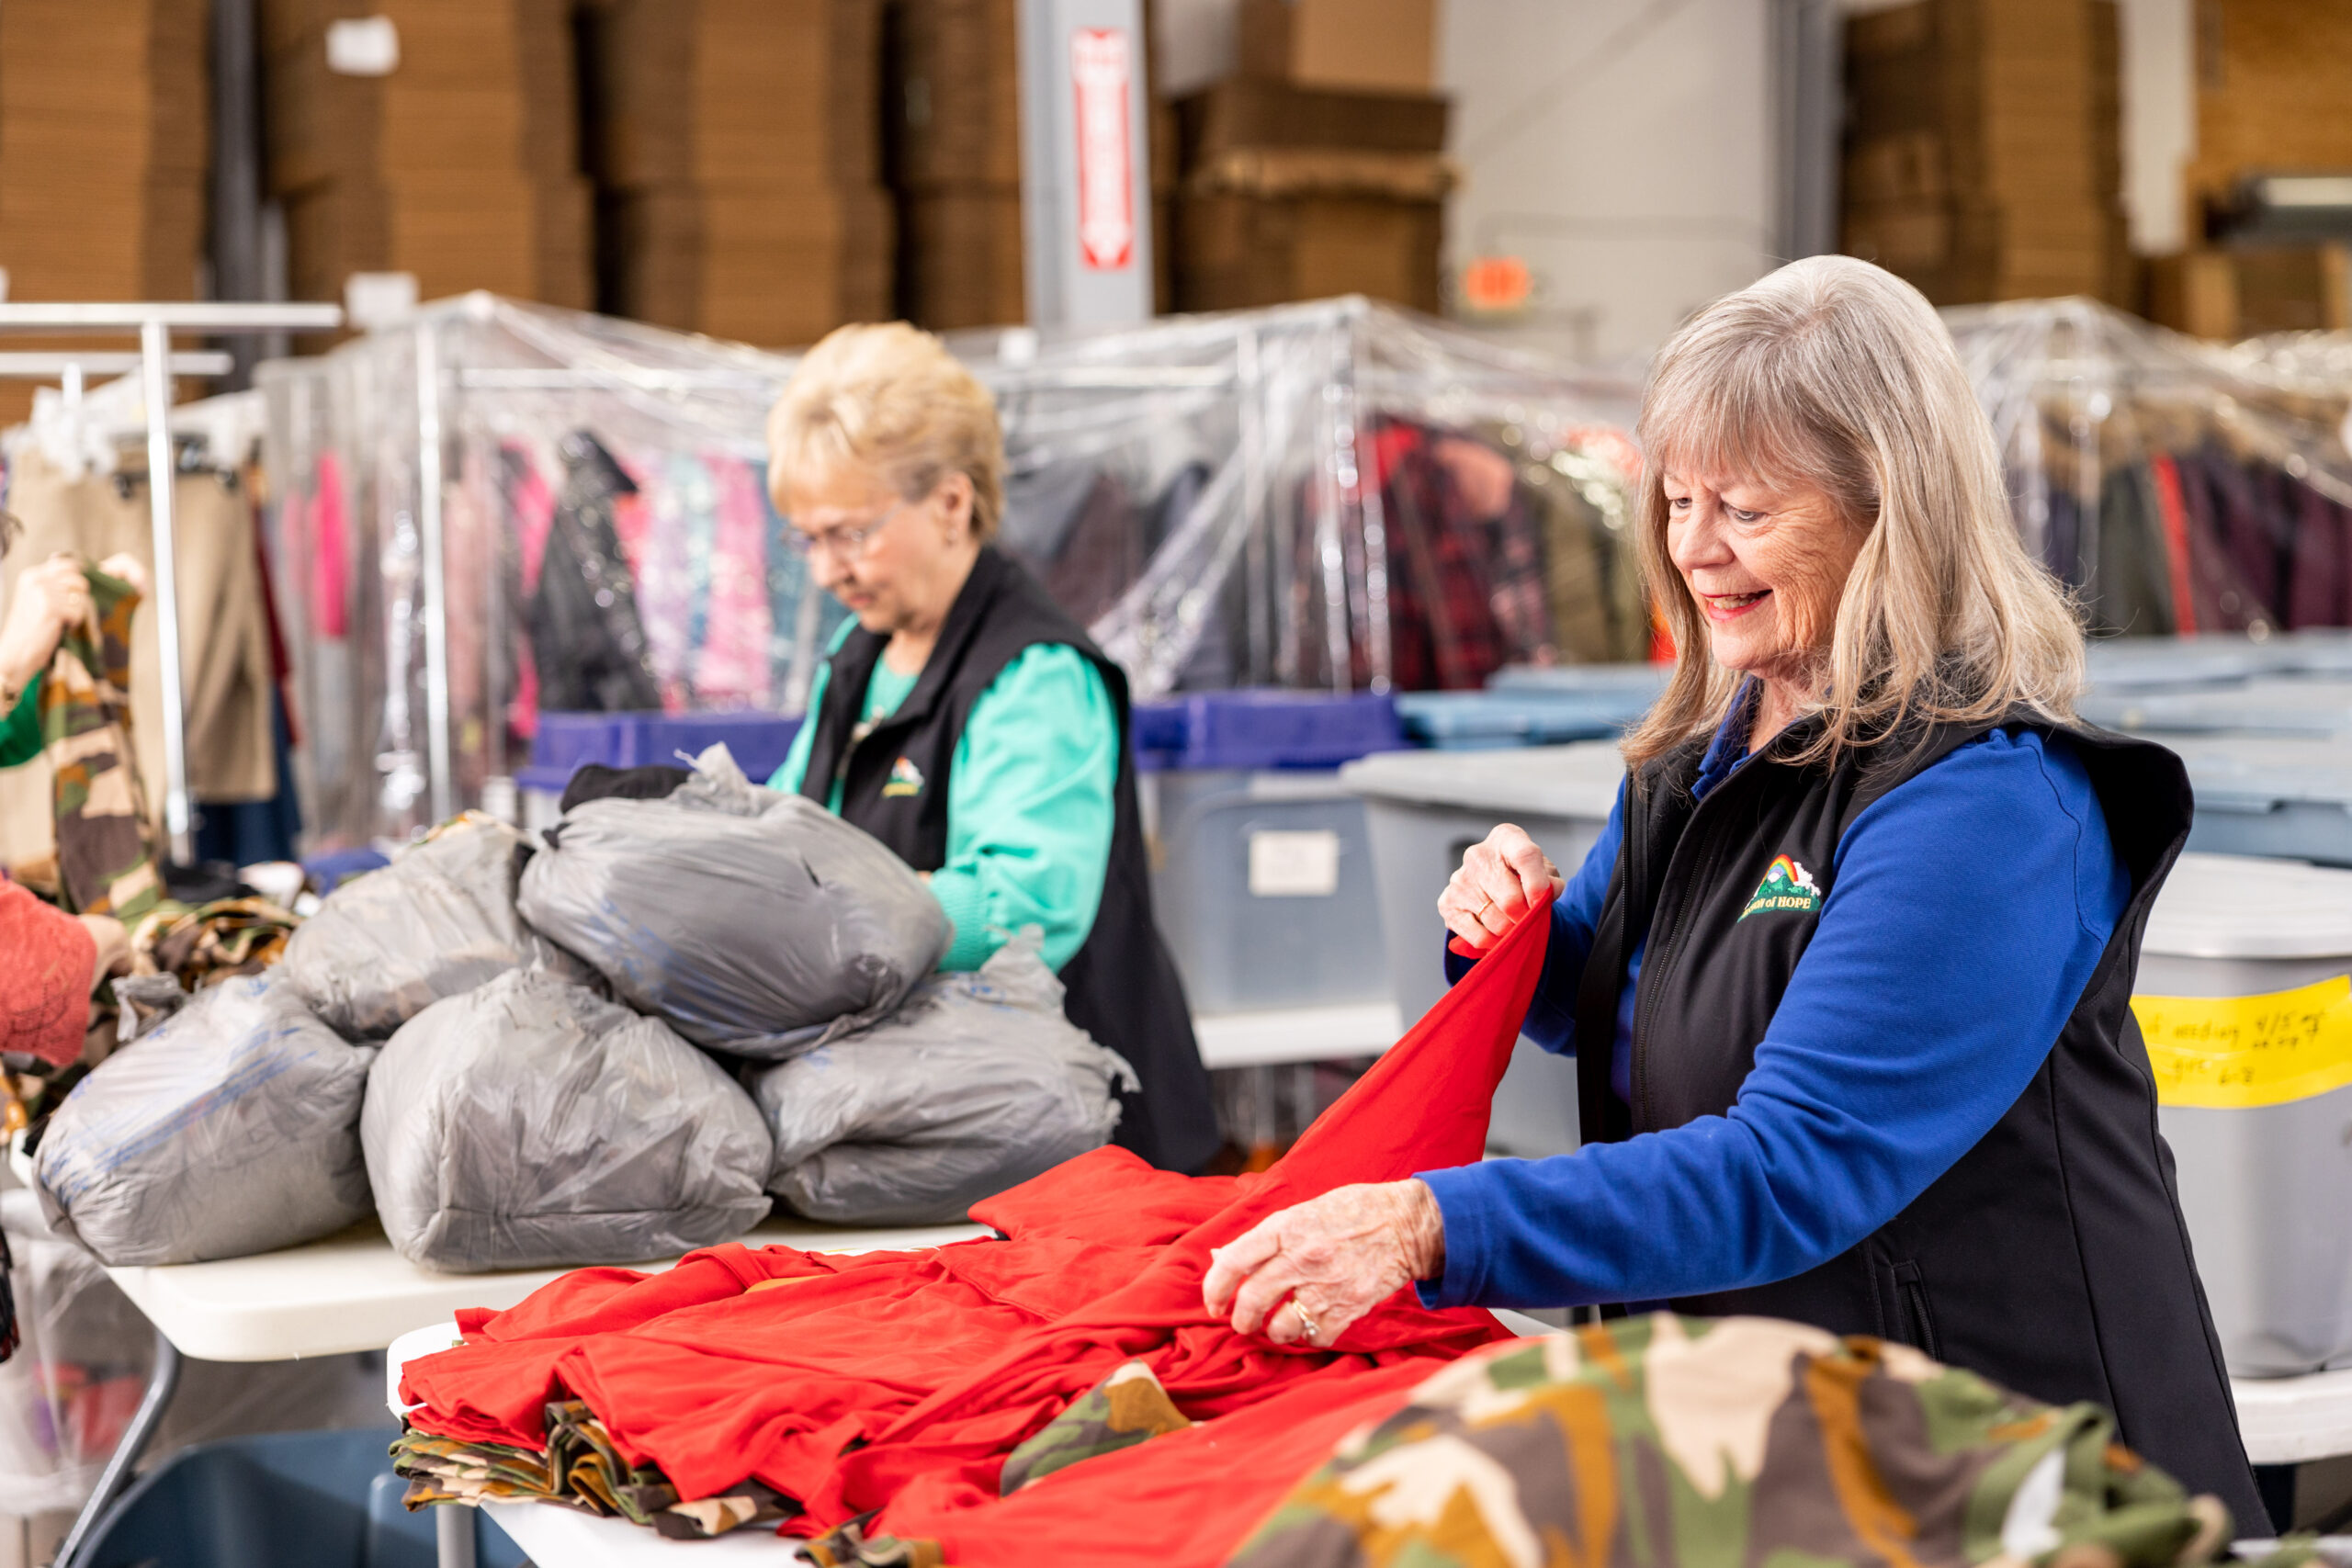 Two women sorting clothes in a warehouse.